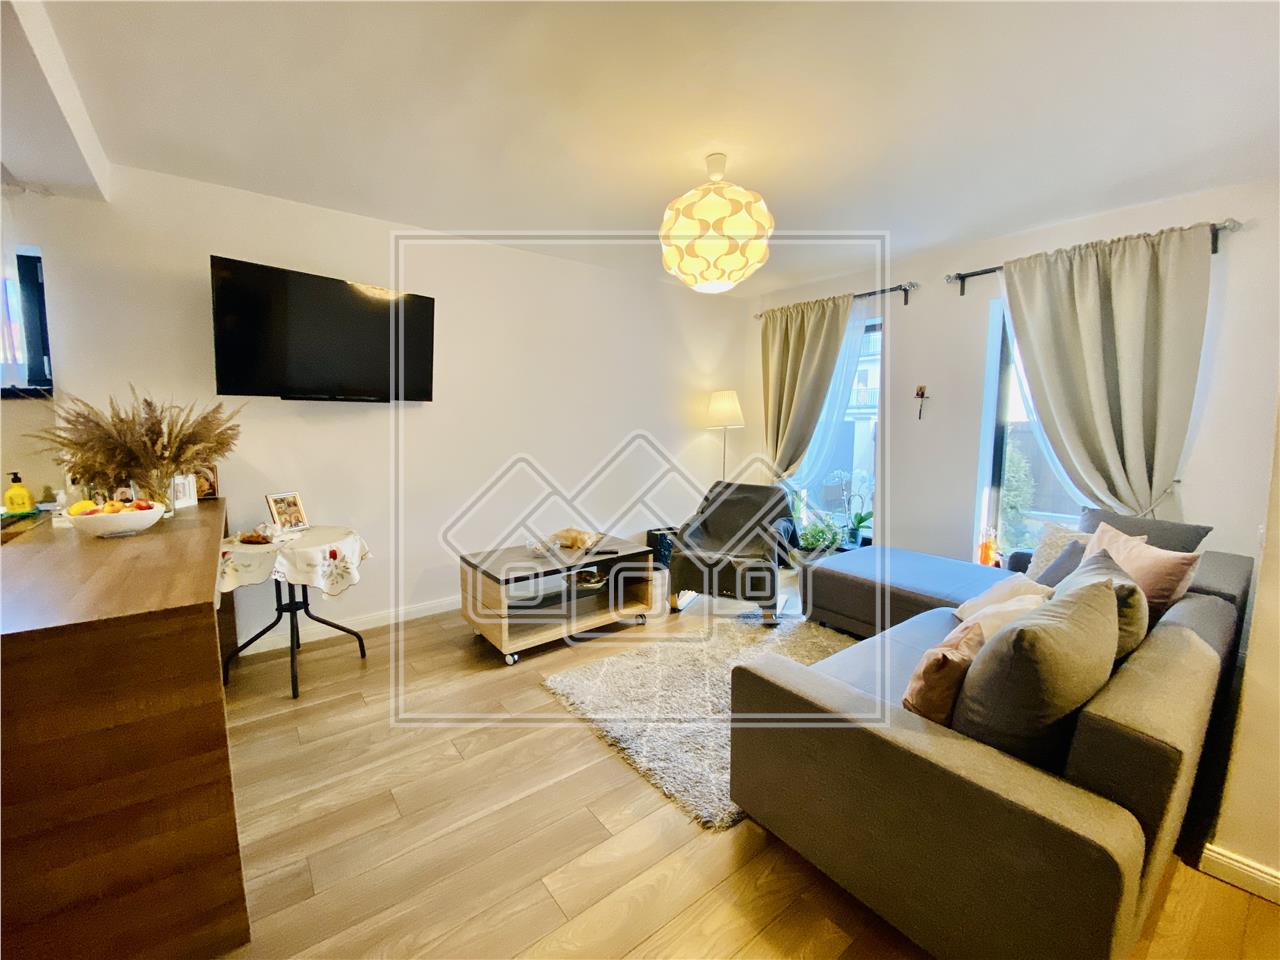 House for sale in Sibiu luxuriously furnished